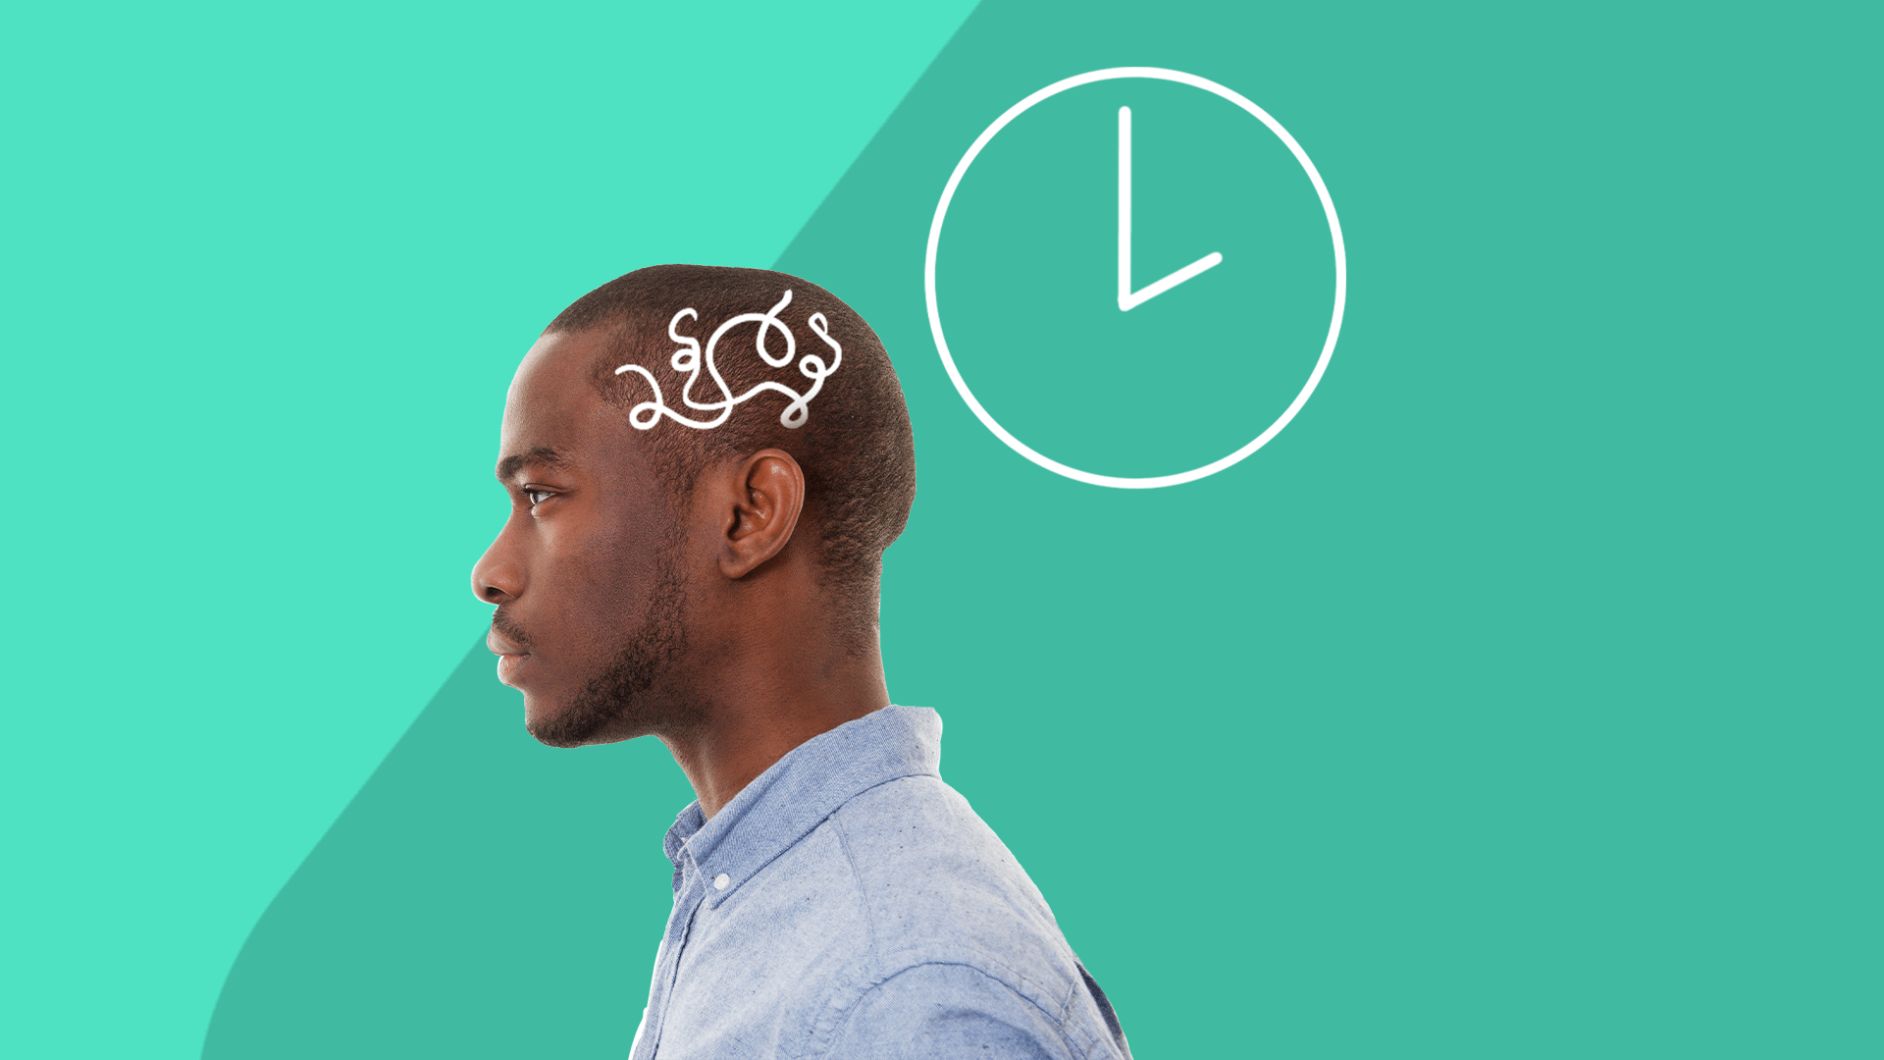 How long do migraines last? A man with a clock